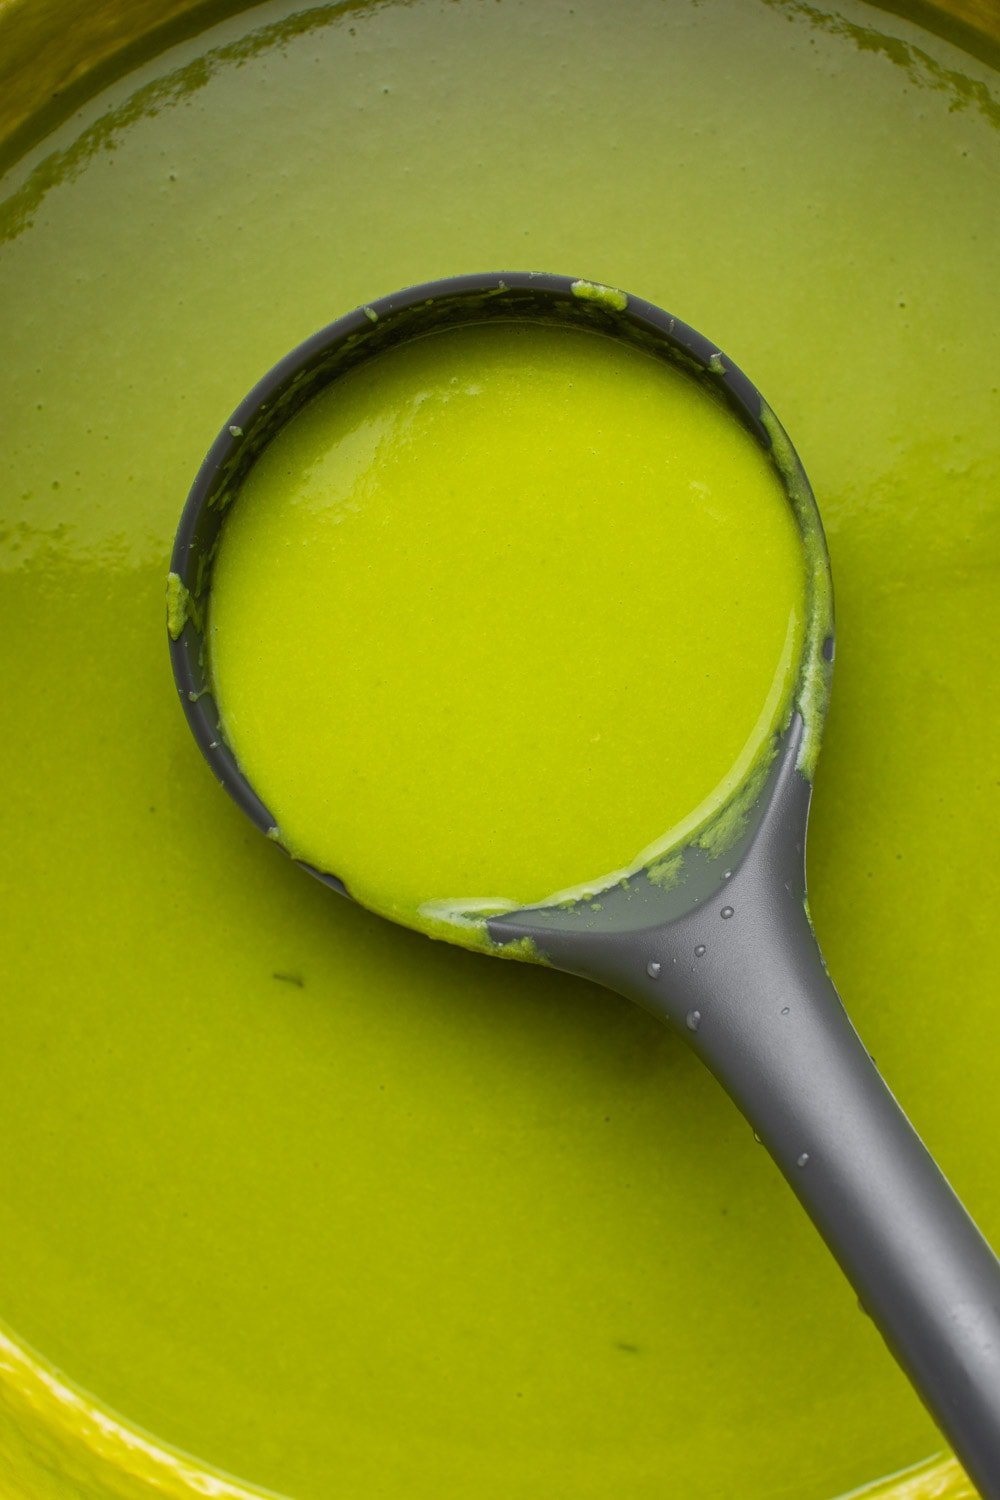 a zoomed in image of a serving spoon digging in on the green pea soup to show the soup's texture